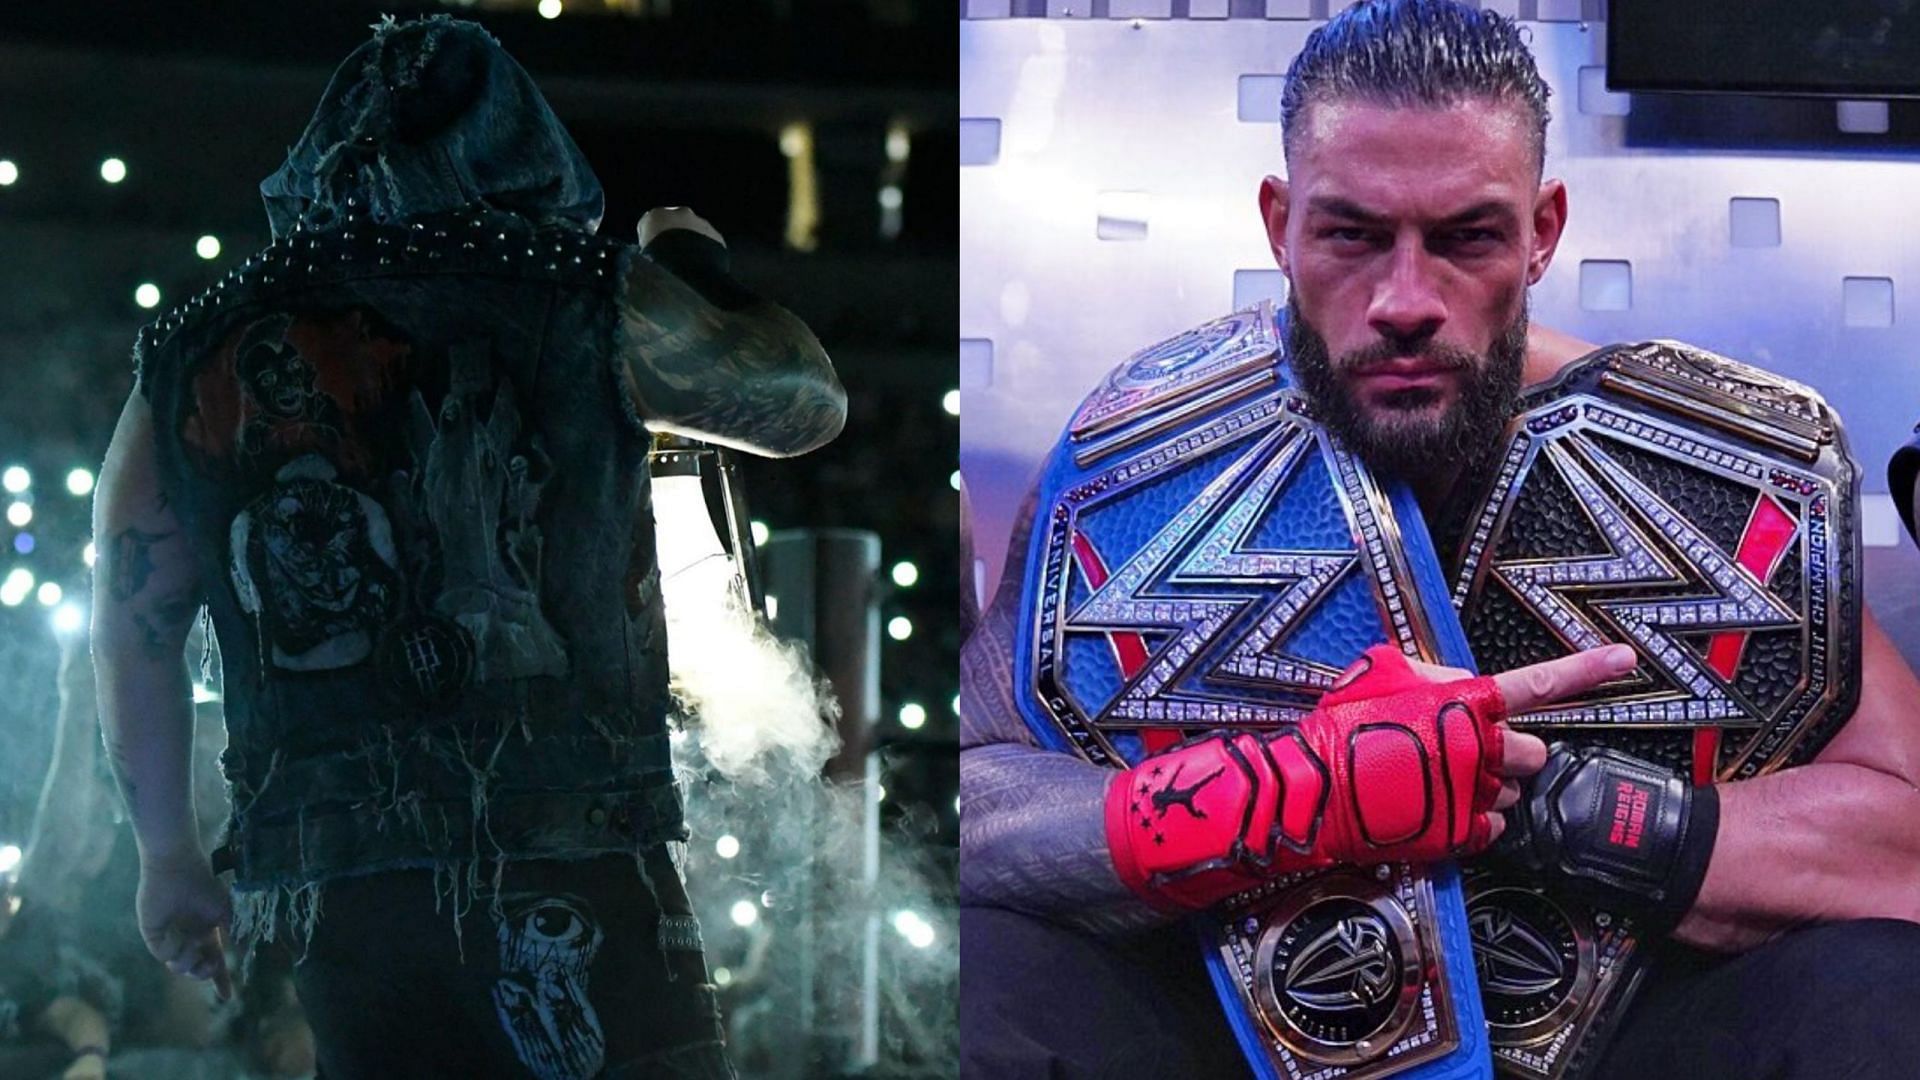 5 Superstars who could defeat Roman Reigns to the next